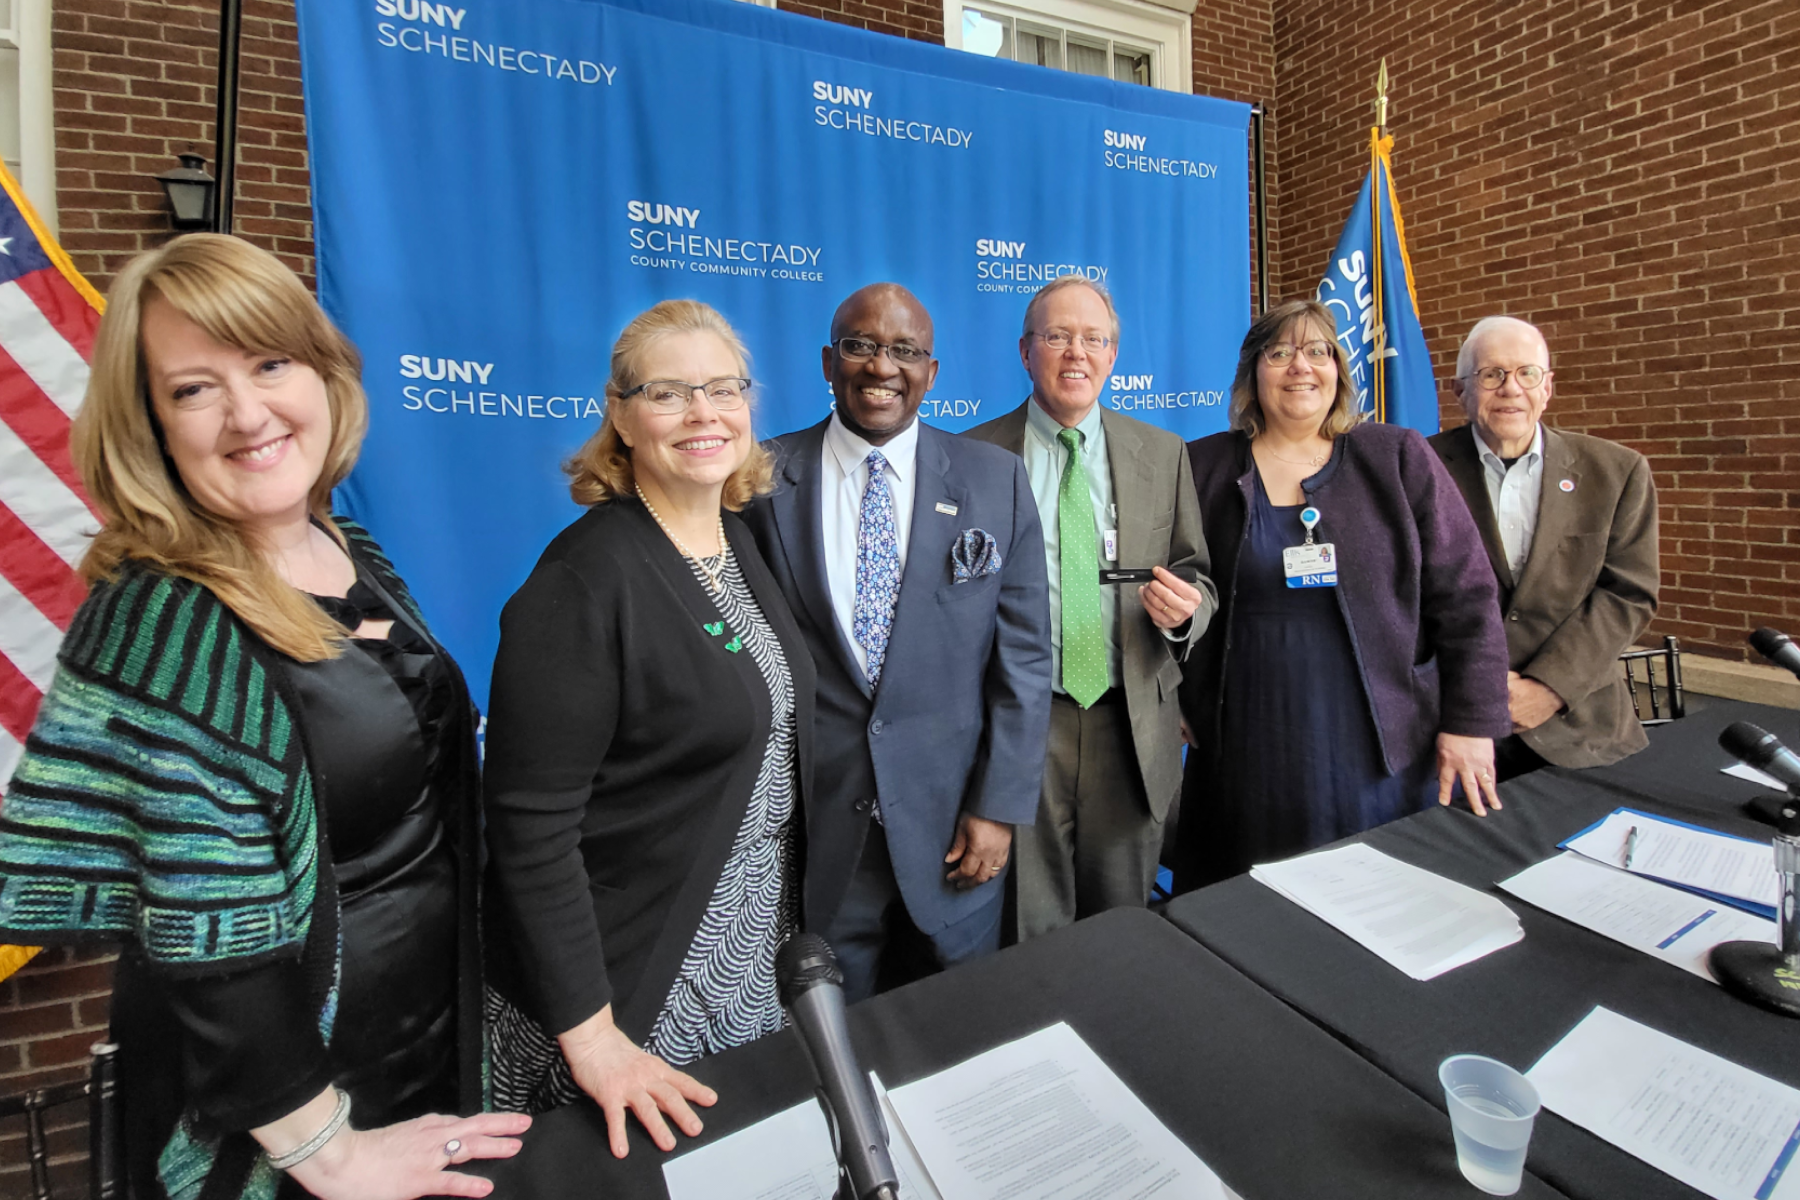 Officials from Ellis Medicine and SUNY Schenectady standing, smiling with college backdrop behind them